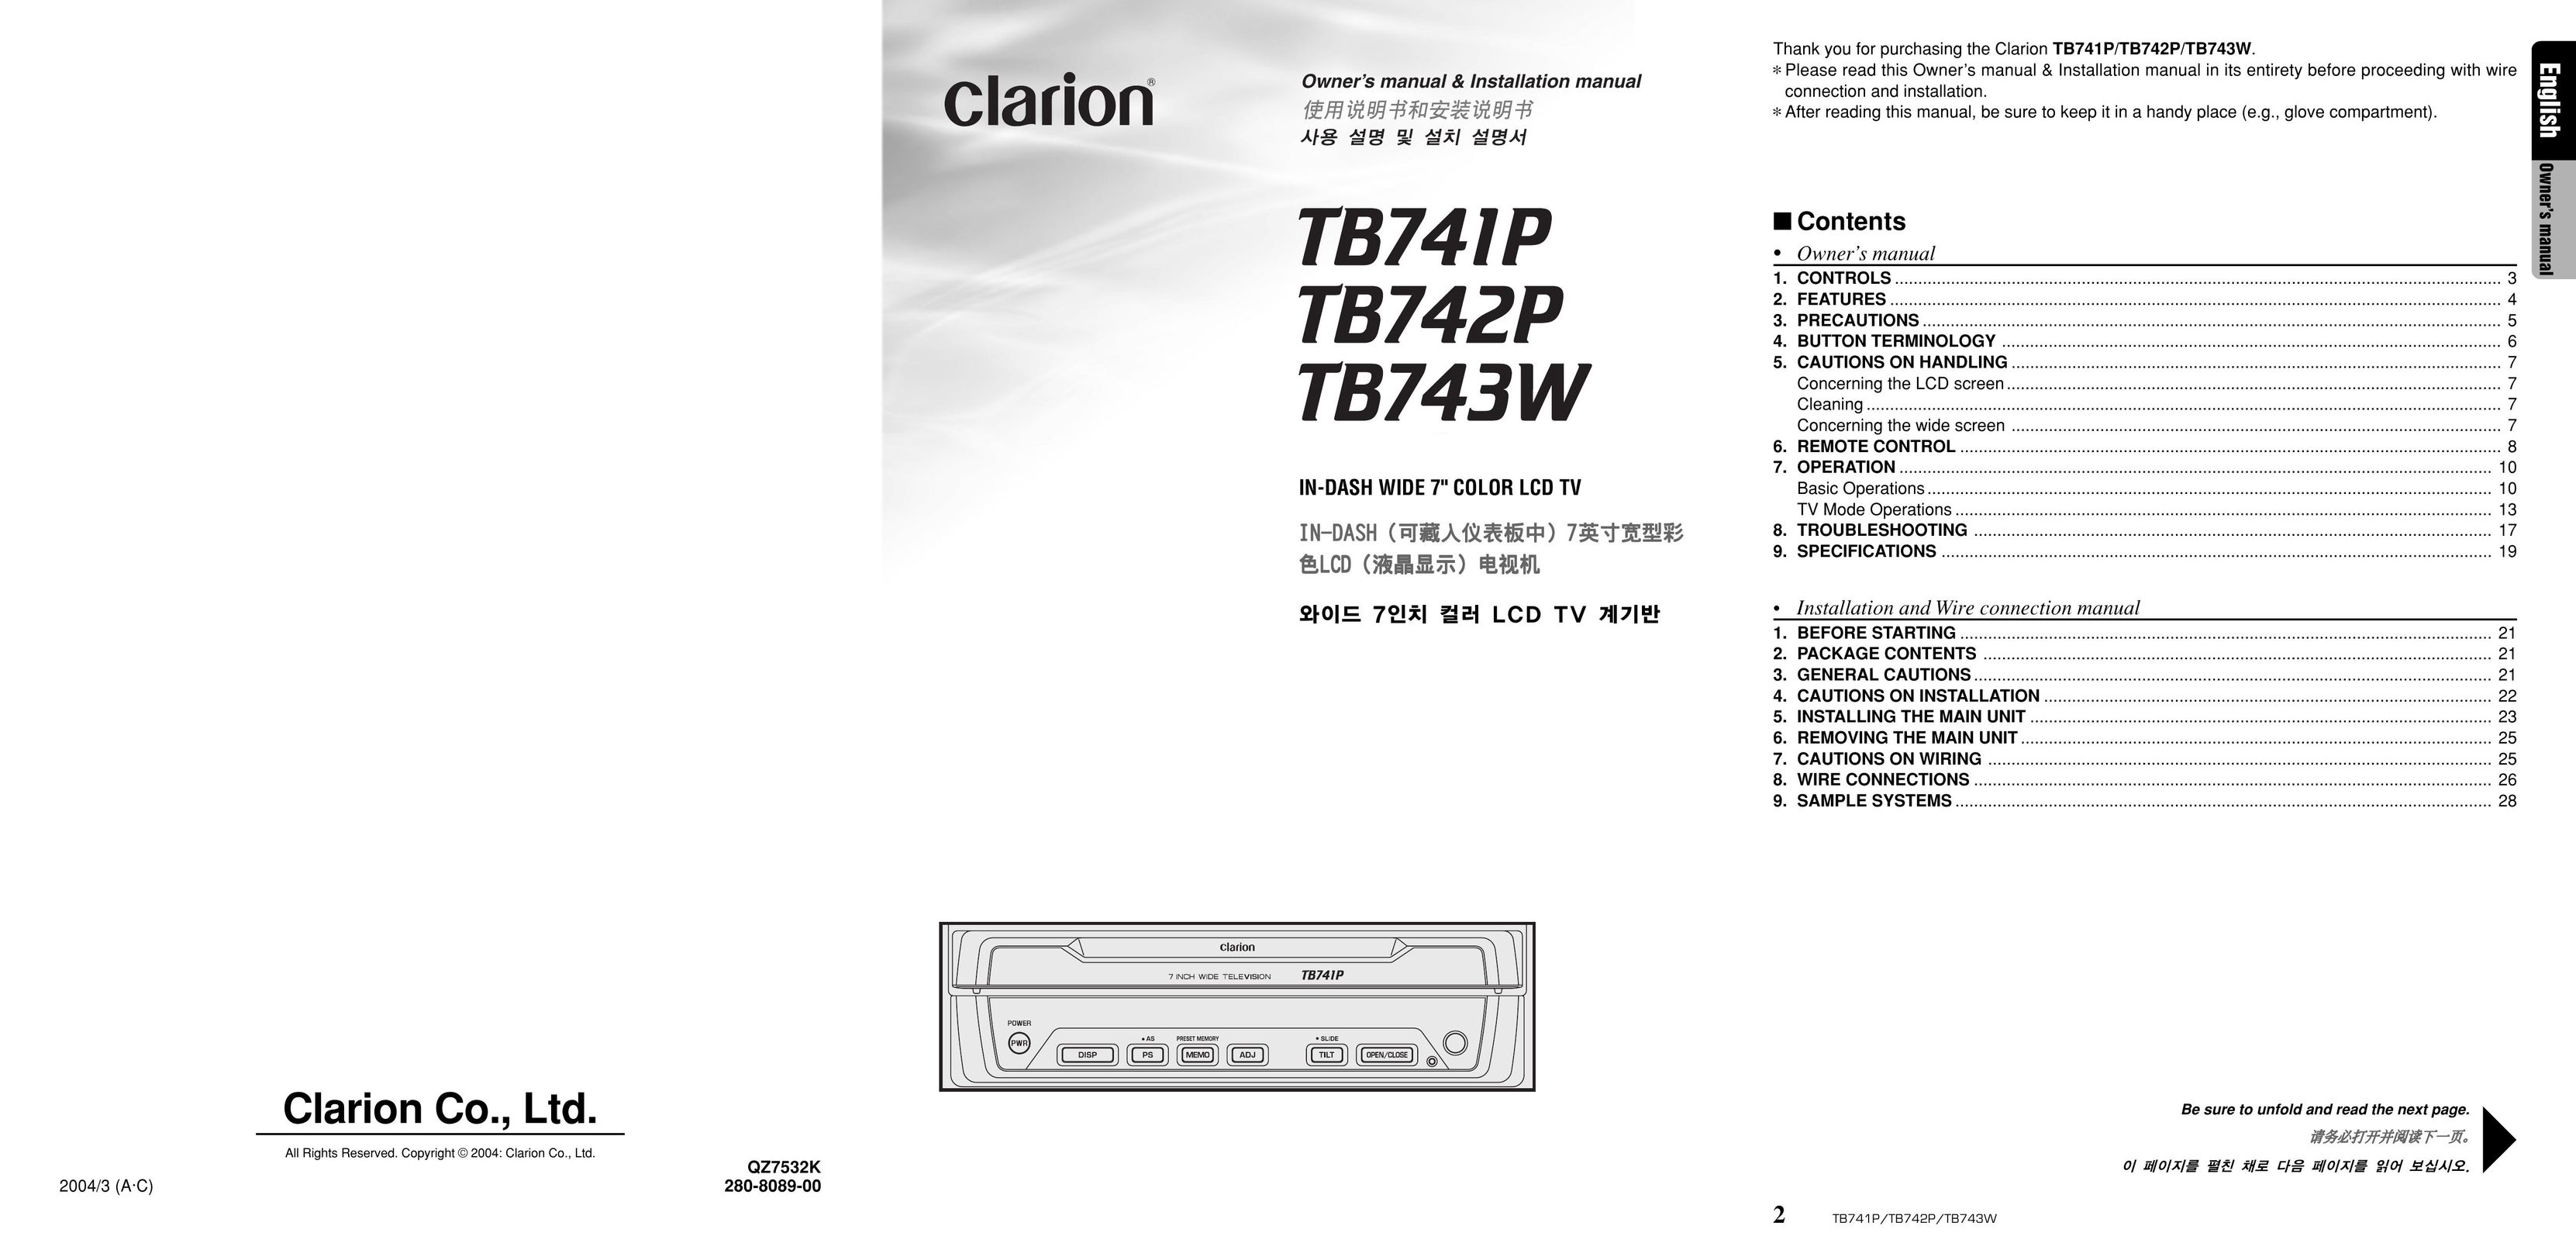 Clarion TB742P Flat Panel Television User Manual